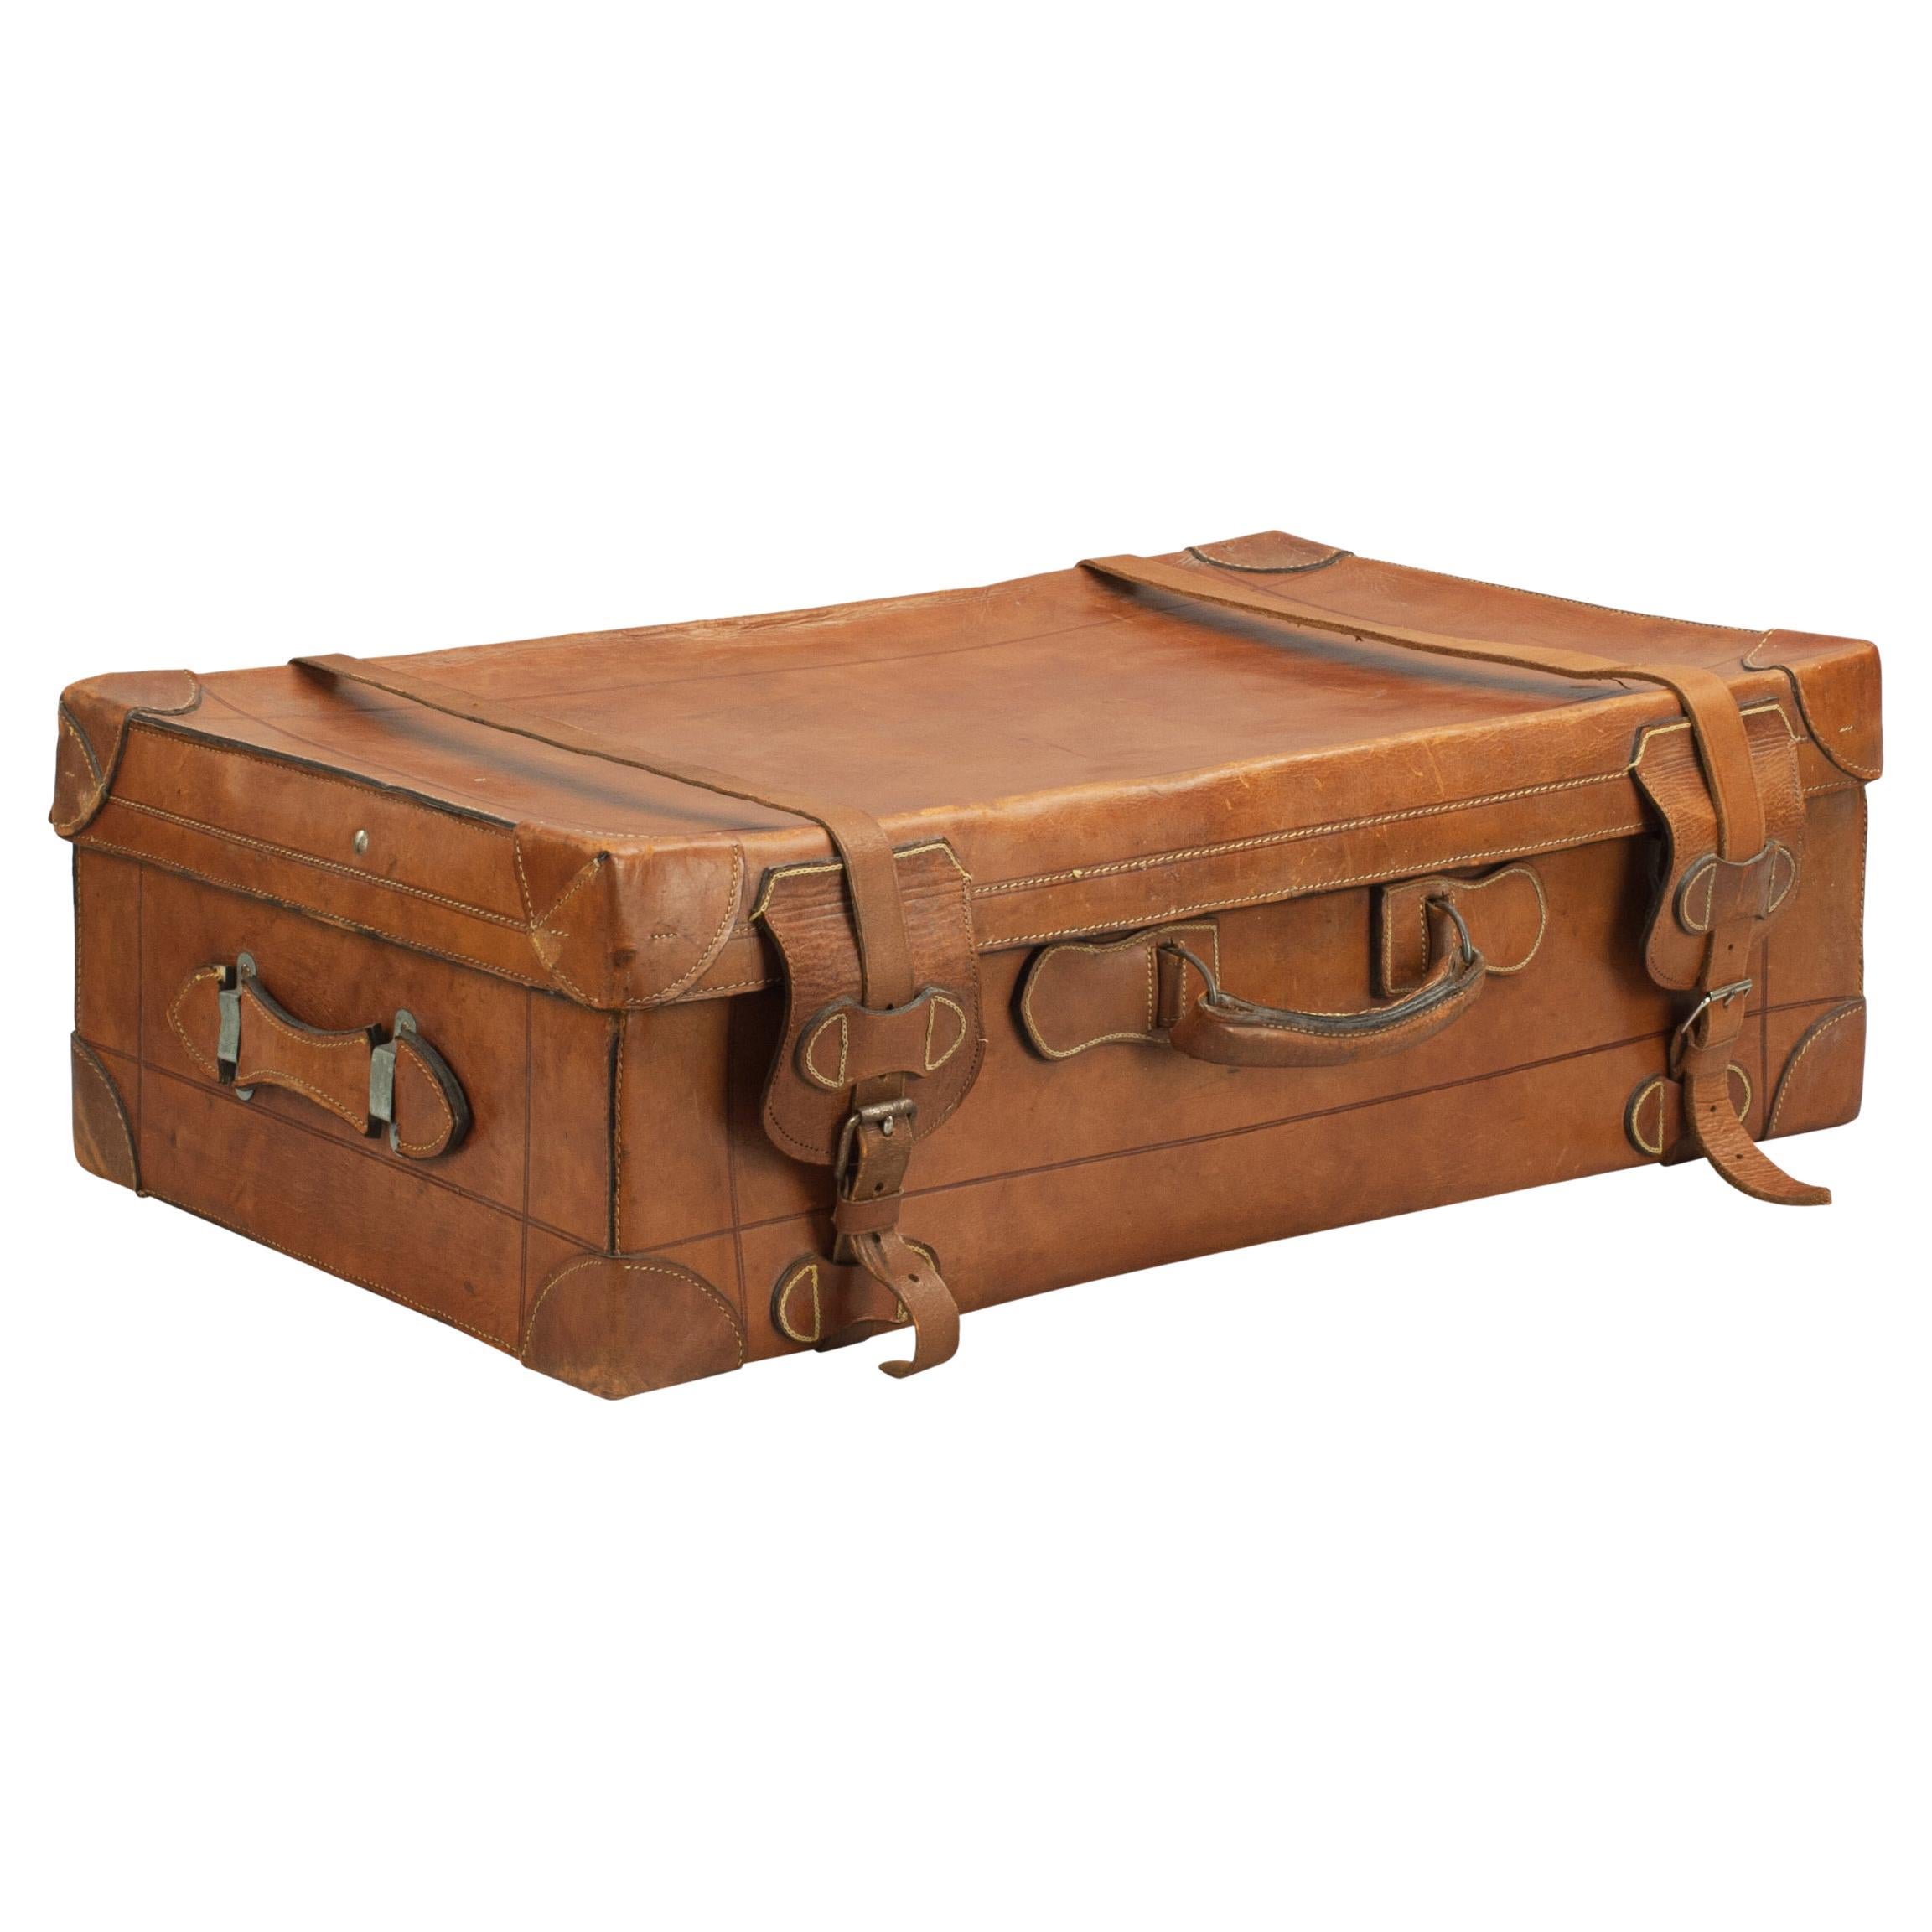 Antique Leather Suitcase, Travelling Luggage or Motoring Case